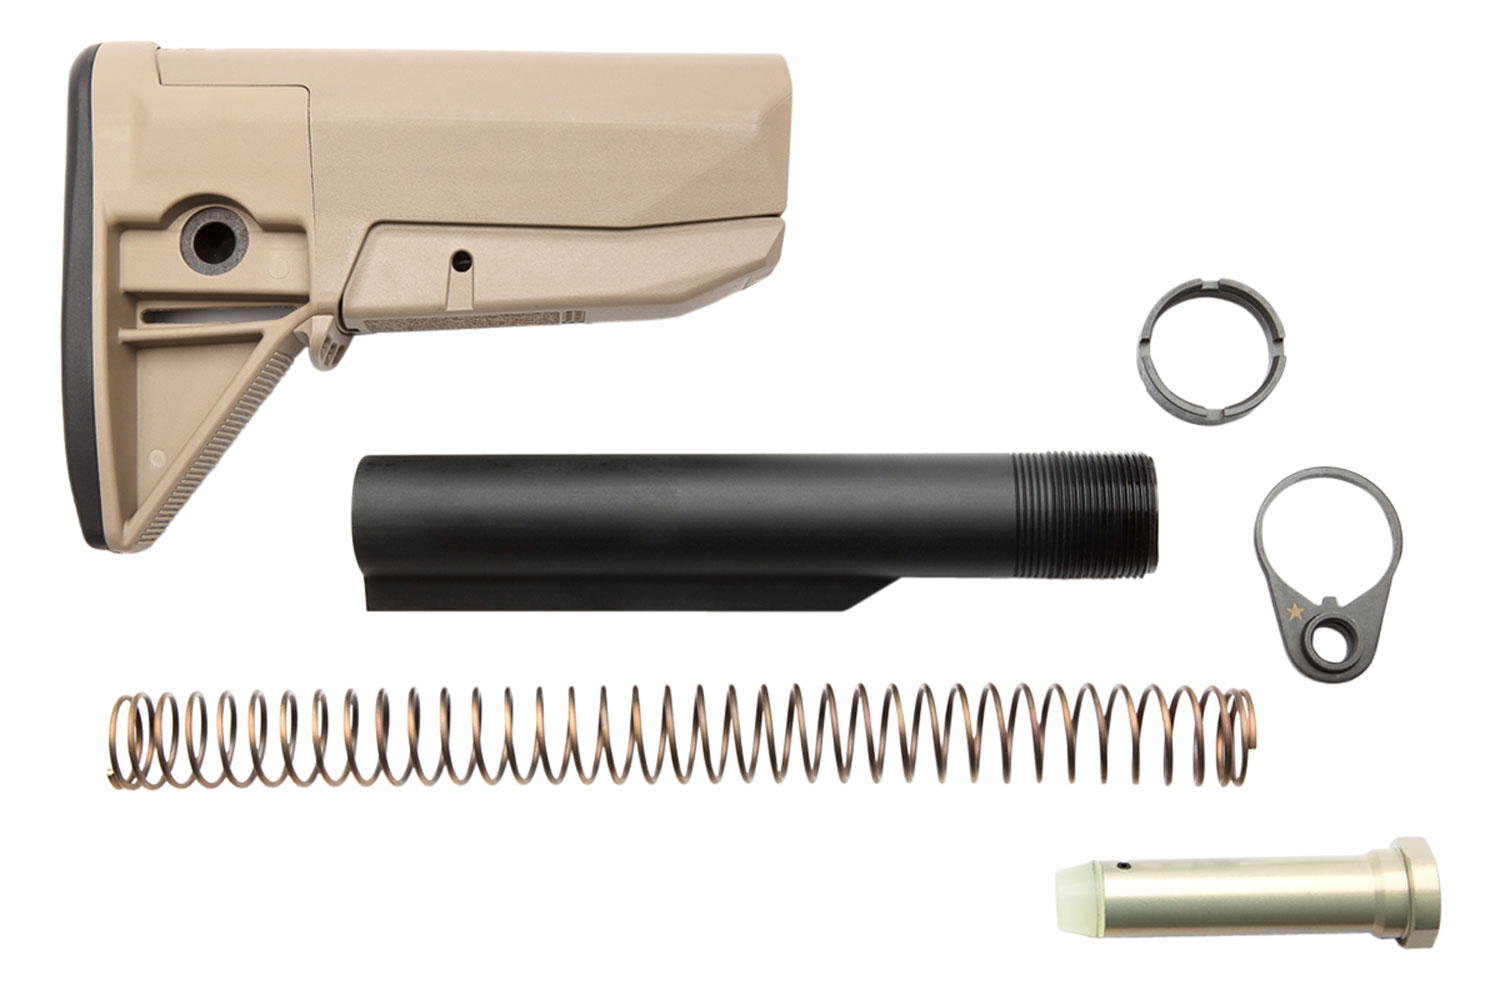 BCM GFSKMOD0FDE BCMGunfighter Stock Kit Flat Dark Earth Synthetic for AR-15 Includes Stock Tube